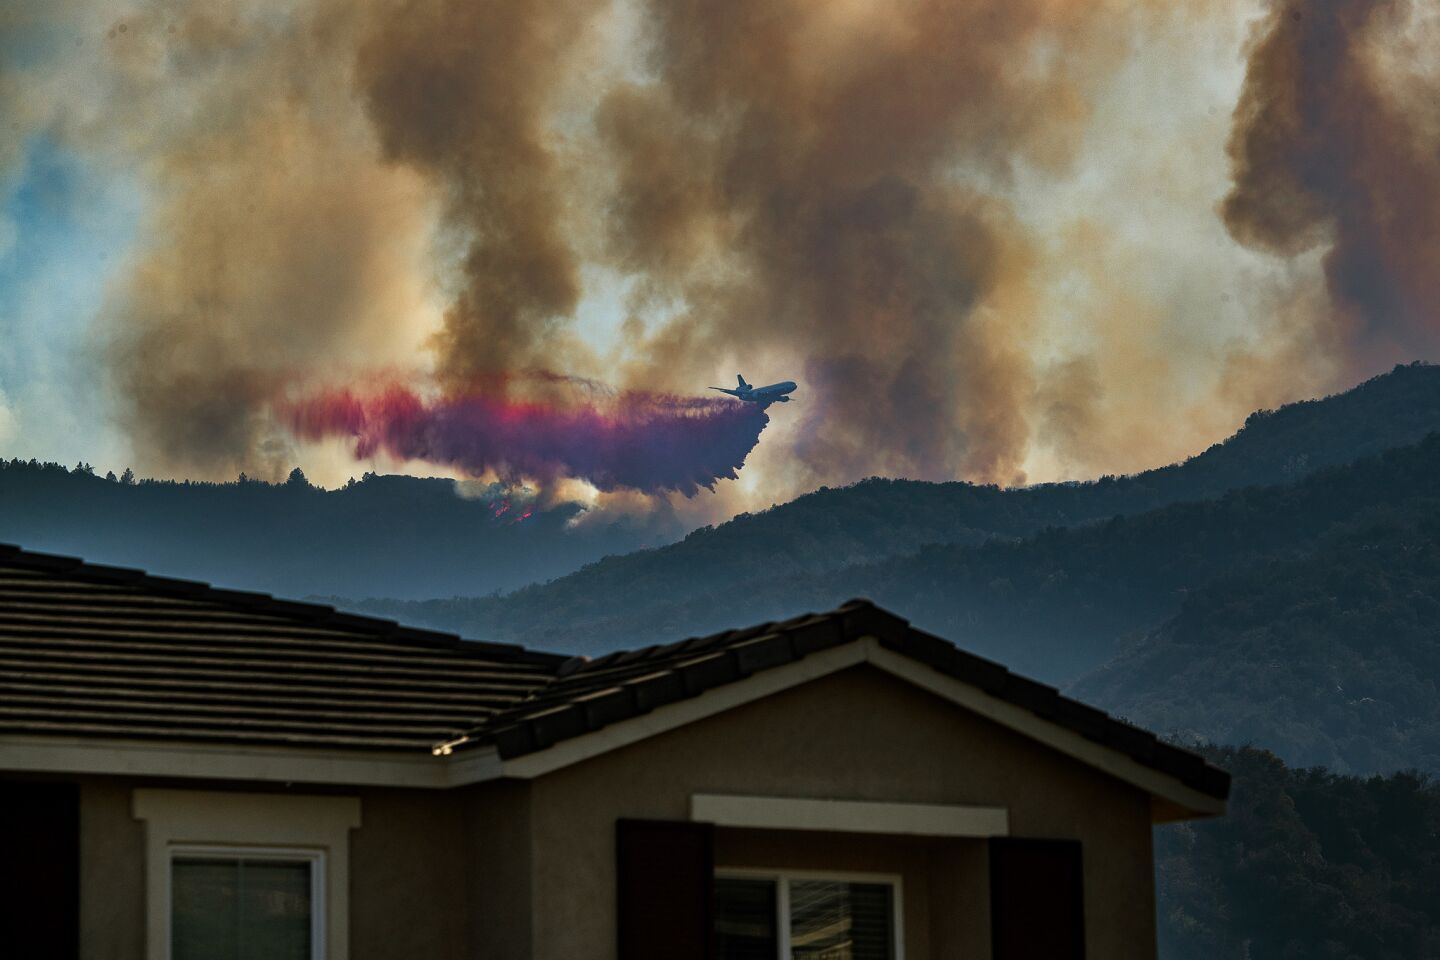 A plane drops fire retardant on the Holy fire burning in Cleveland National Forest above a home in Lake Elsinore on Aug. 7.